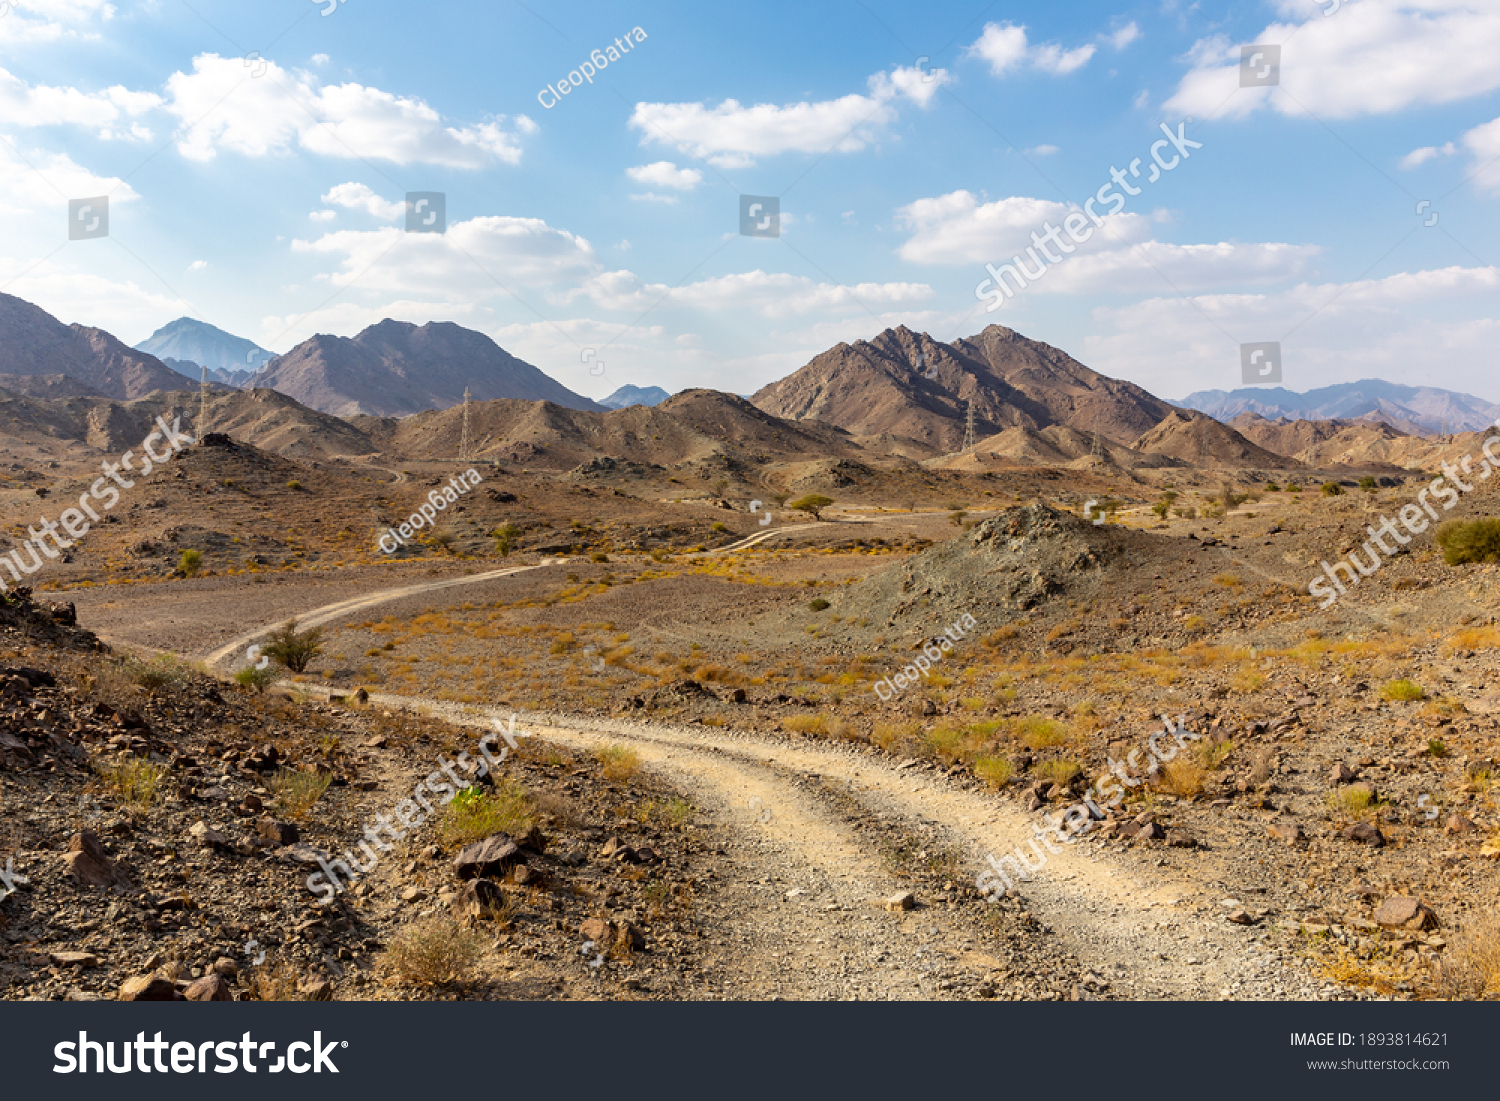 Copper Hike trail, winding gravel dirt road through Wadi Ghargur riverbed and rocky limestone Hajar Mountains in Hatta, United Arab Emirates.  #1893814621